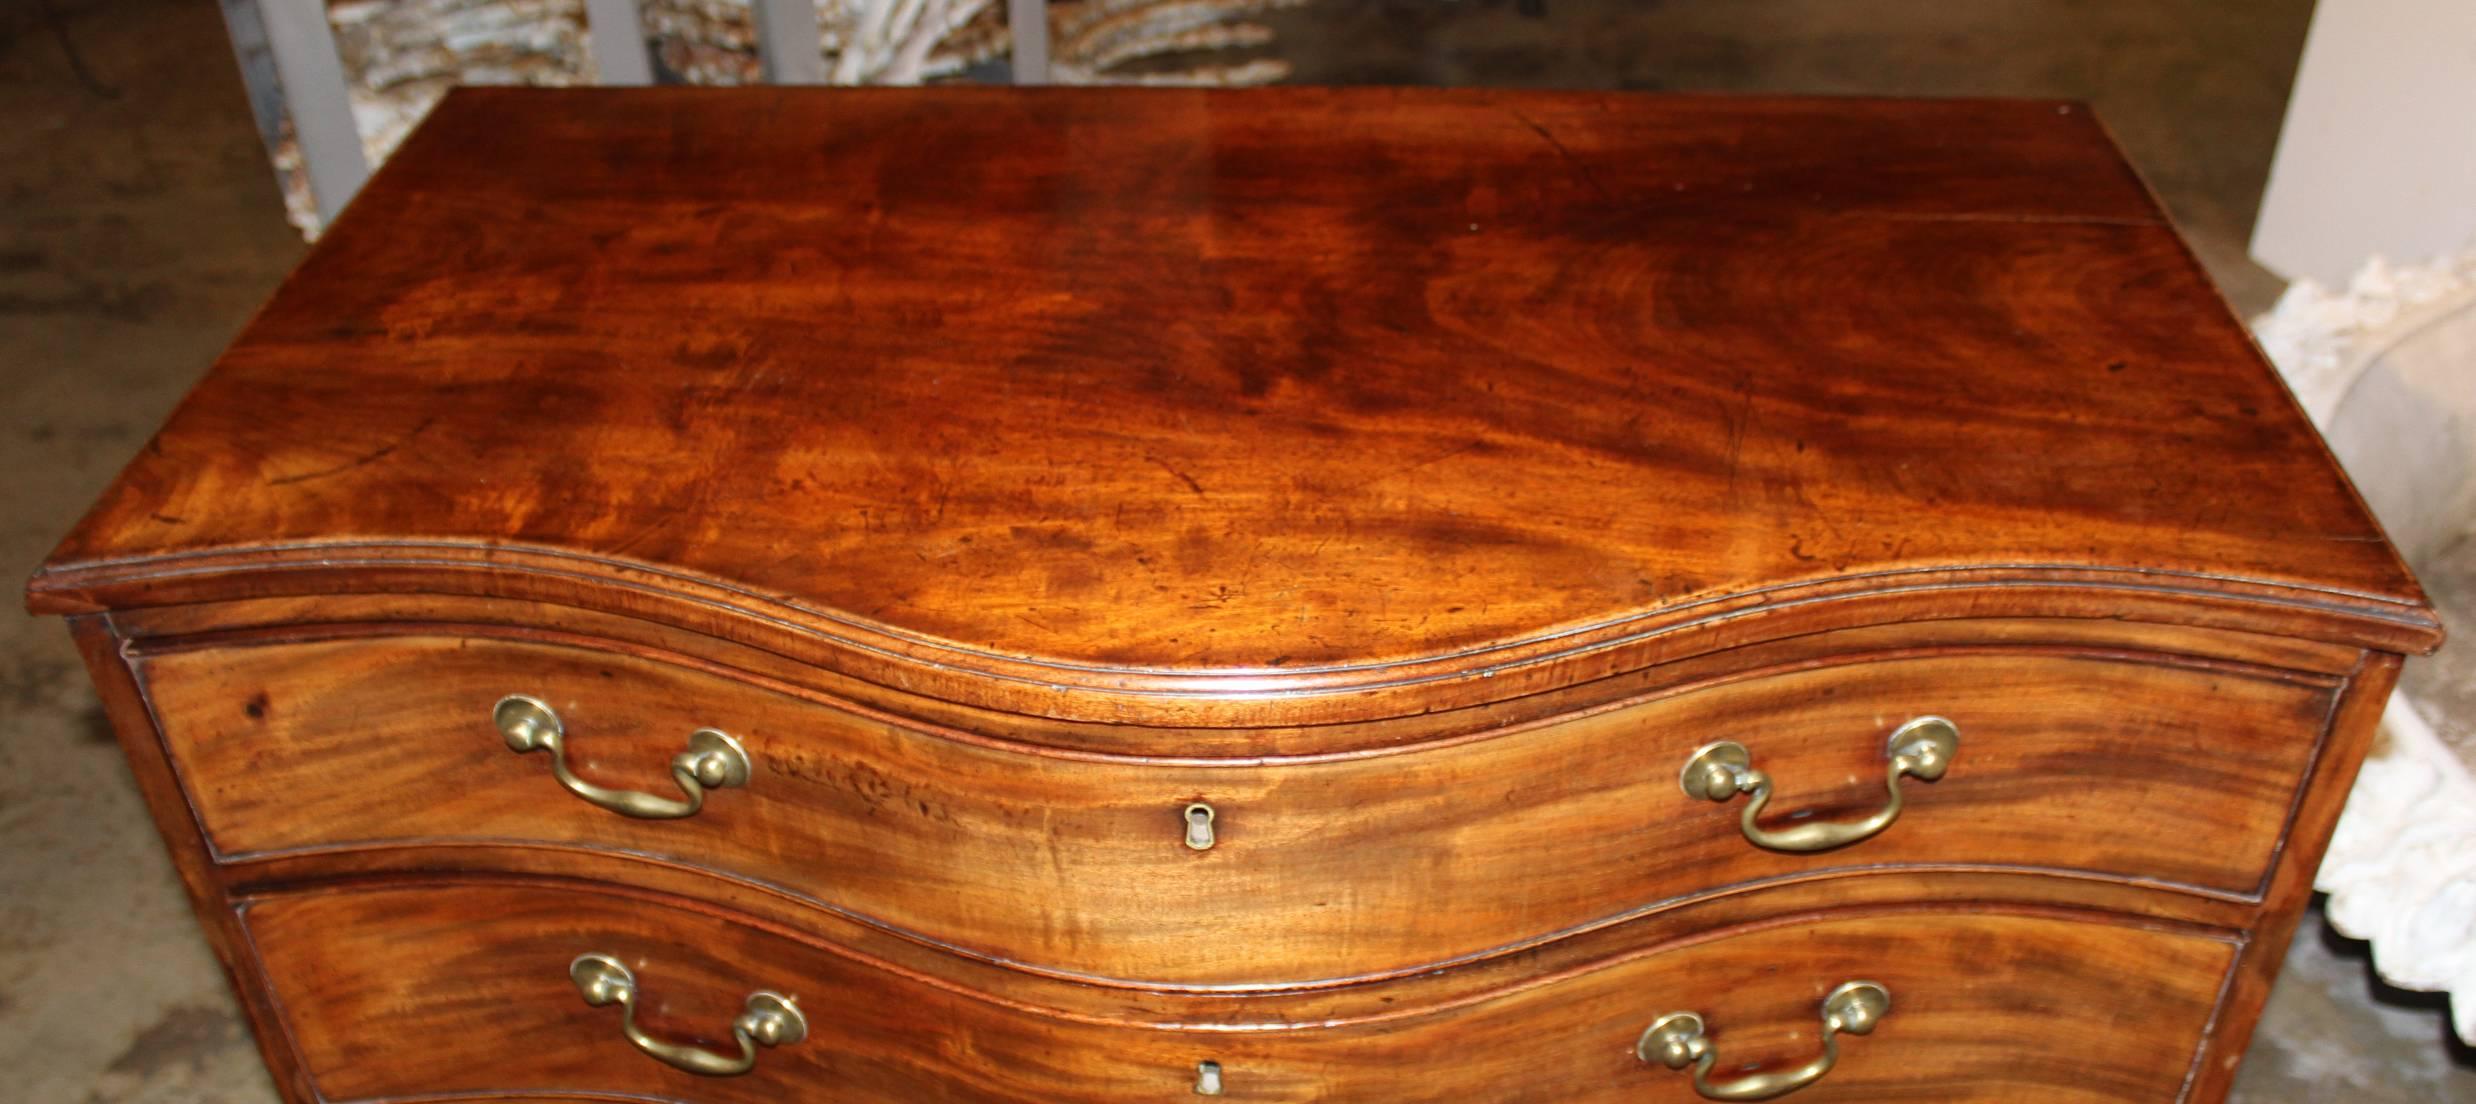 A splendid Georgian mahogany four drawer serpentine chest with dramatic proportions, conforming molded edge top and graduating beaded drawers, all raised by shaped bracket feet. The brasses are possibly original.